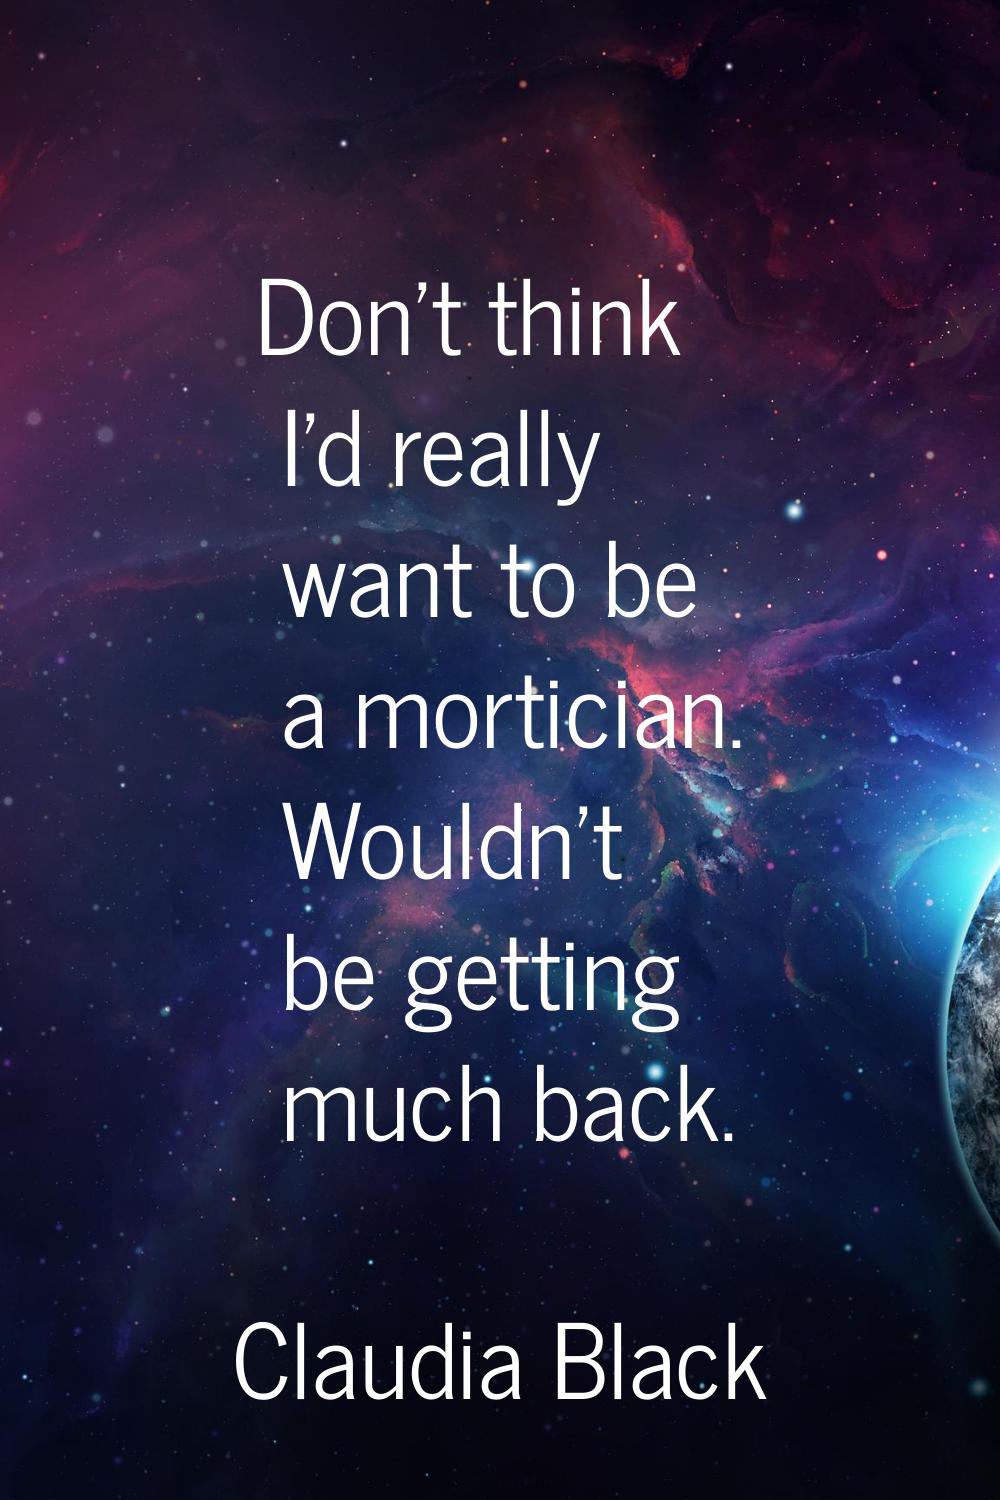 Don't think I'd really want to be a mortician. Wouldn't be getting much back.